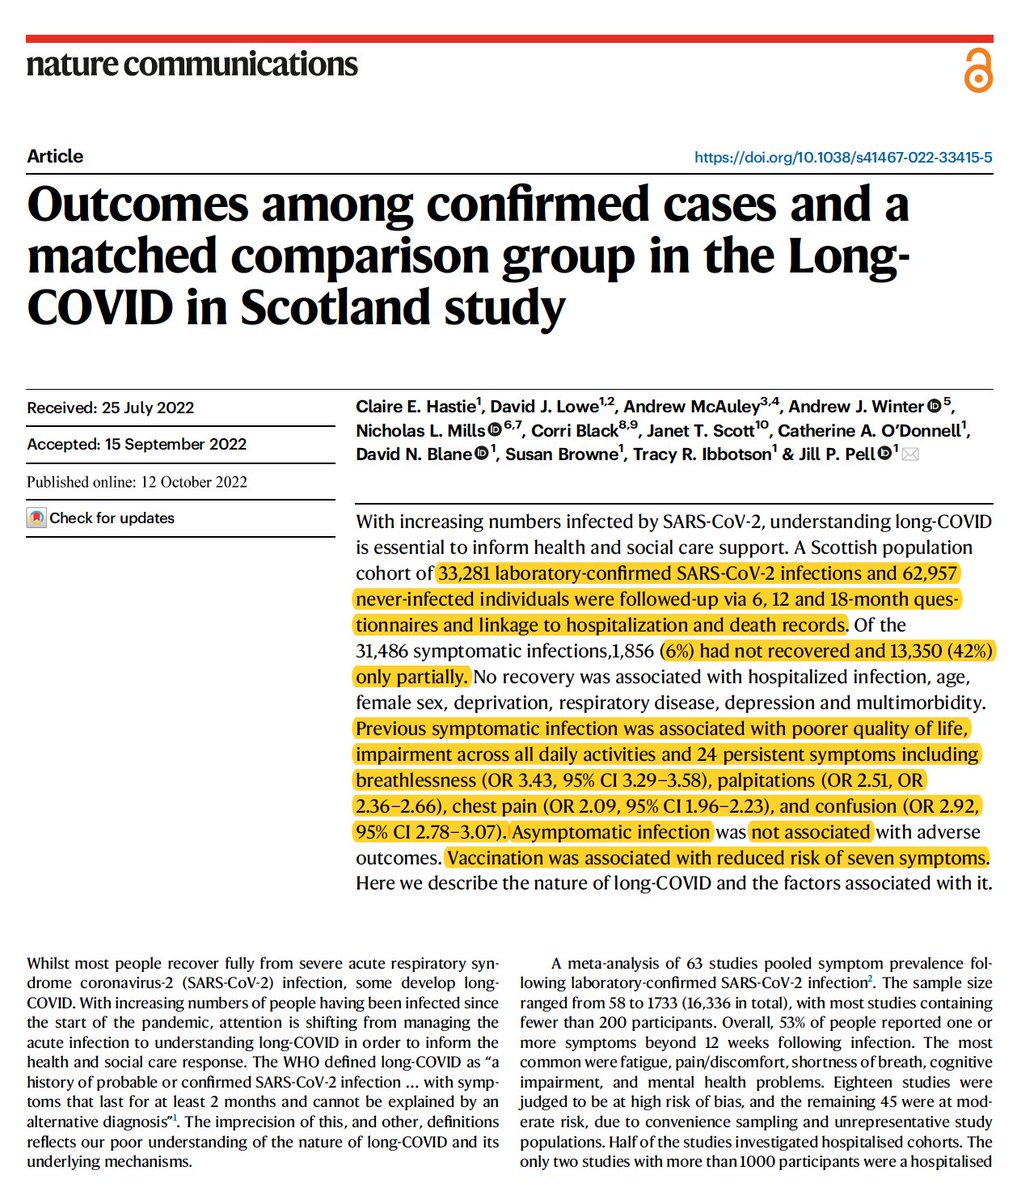 A new #LongCovid nationwide study from Scotland w/ matched controls, 6-18 months follow up, showed 6% no recovery, 42% had only partial recovery, with 'poorer quality of life and wide-ranging impairment of their daily activities which could not be explained by confounding'